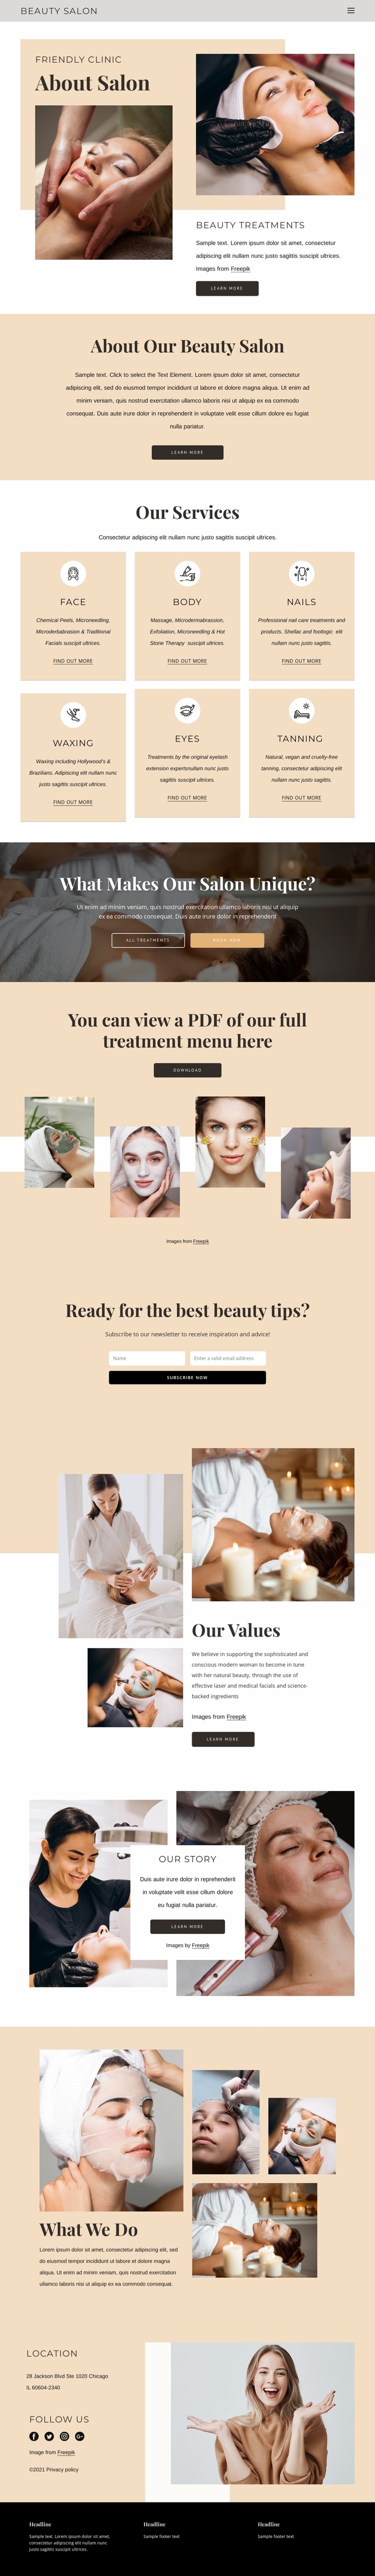 Beauty and aesthetic treatments Website Design